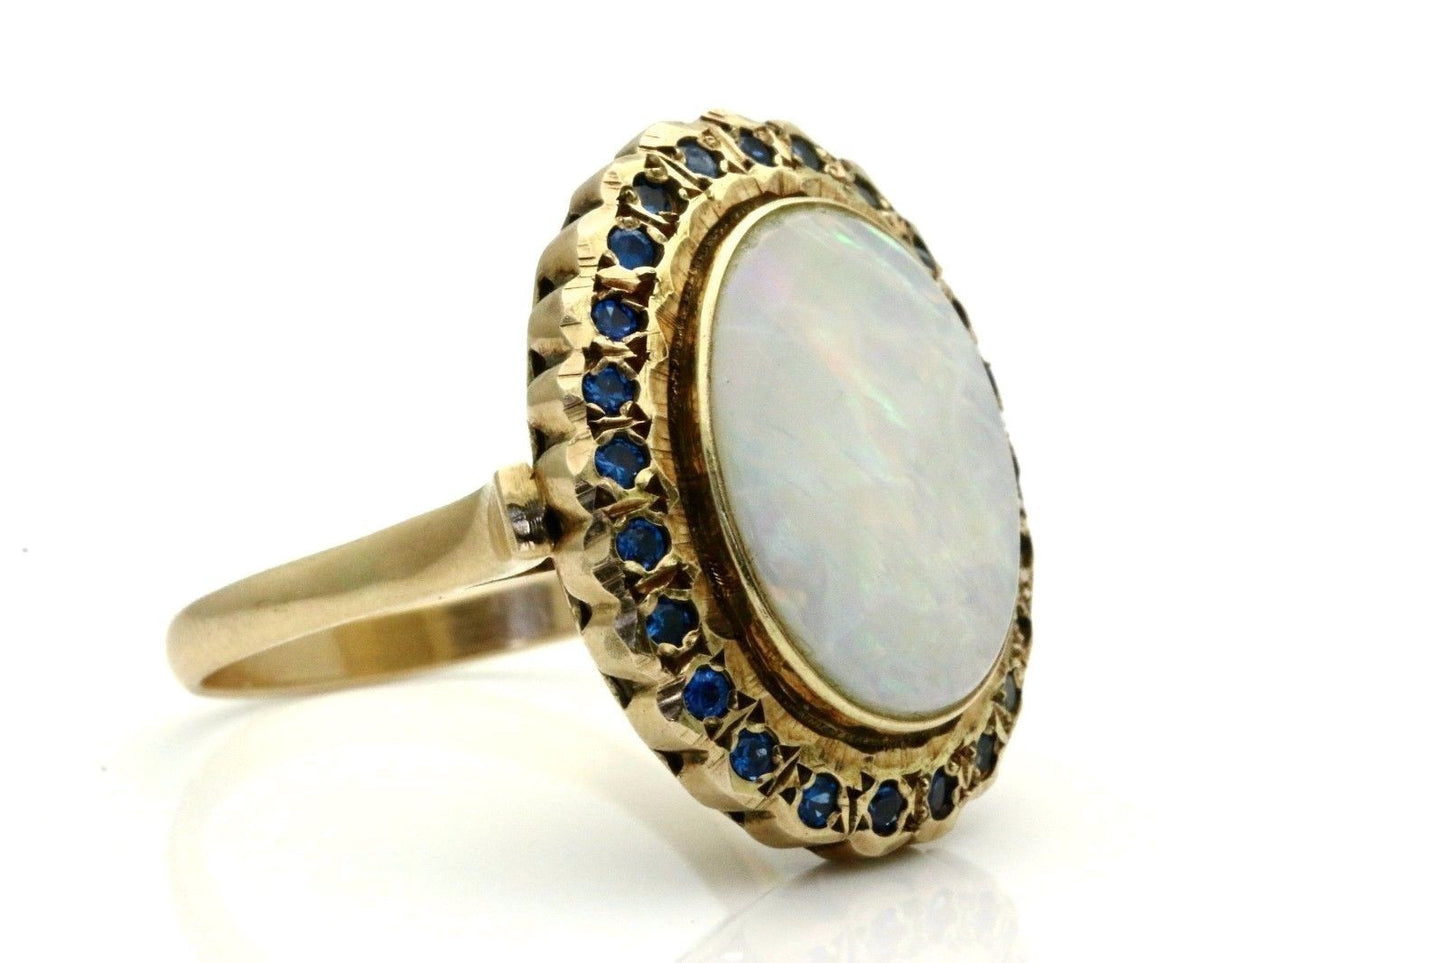 Large Vintage Oval Cabochon Opal Ring Solid 14K Yellow Gold